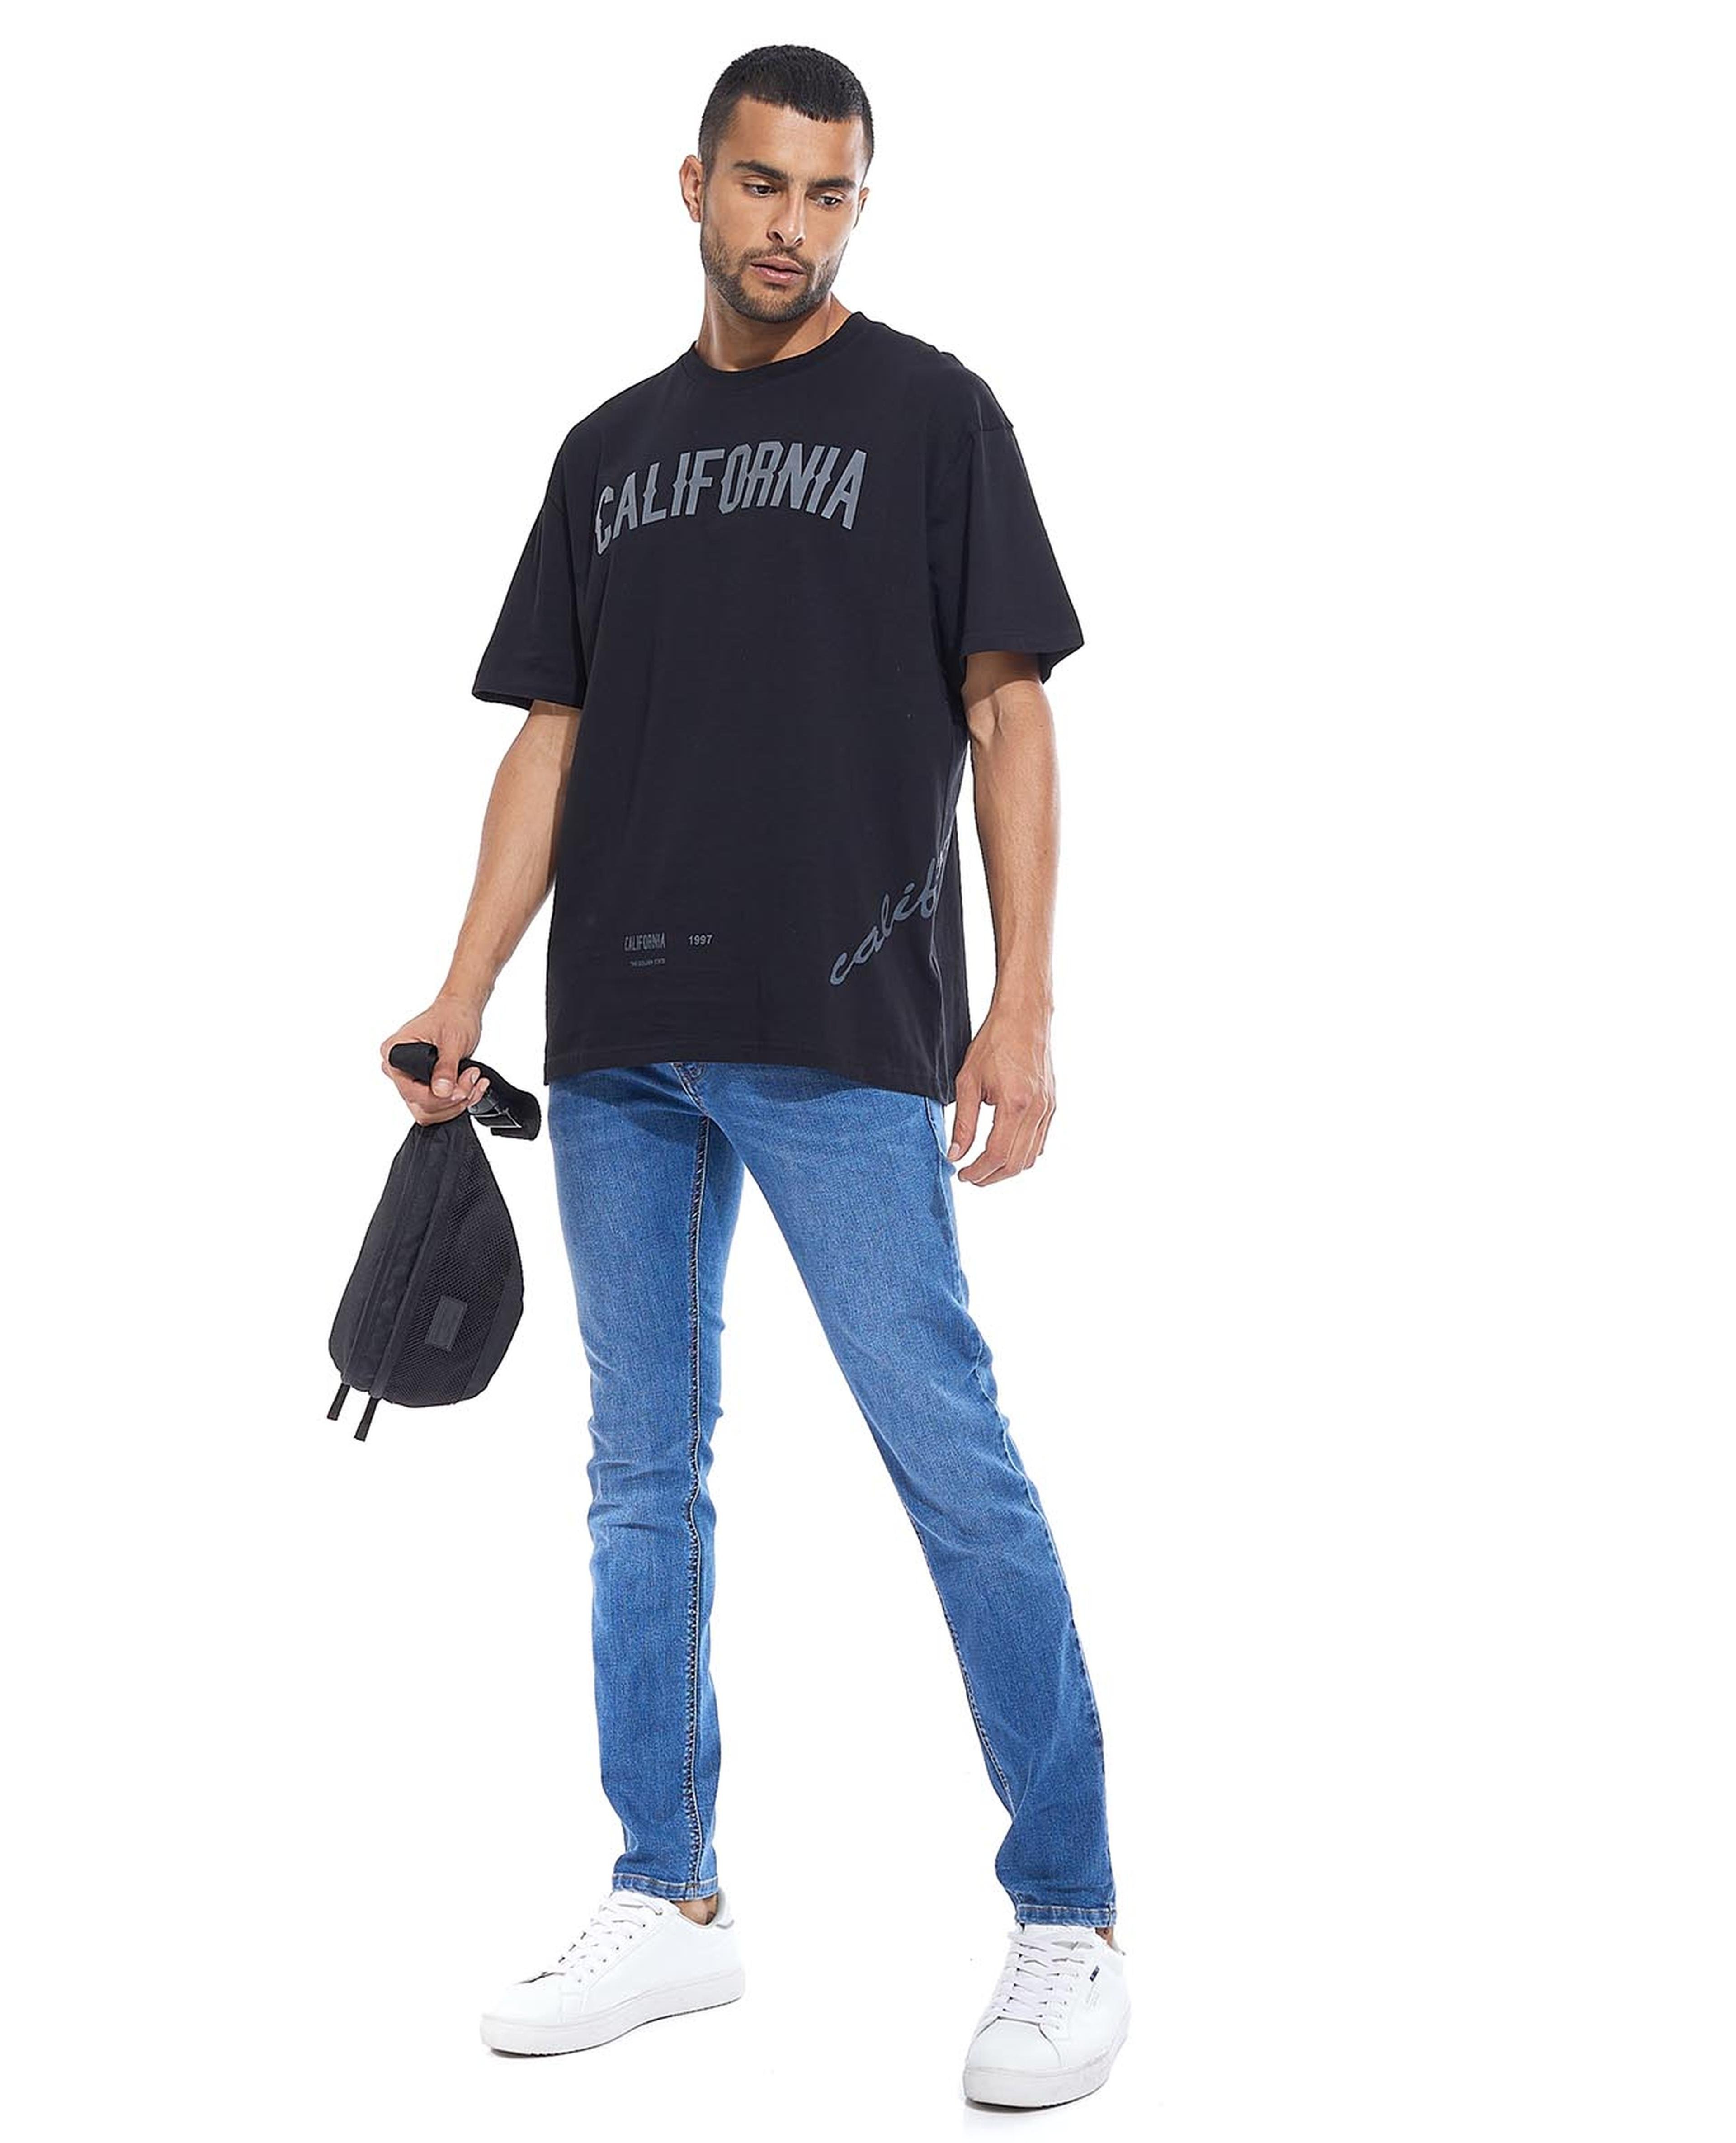 Faded Slim Fit Jeans